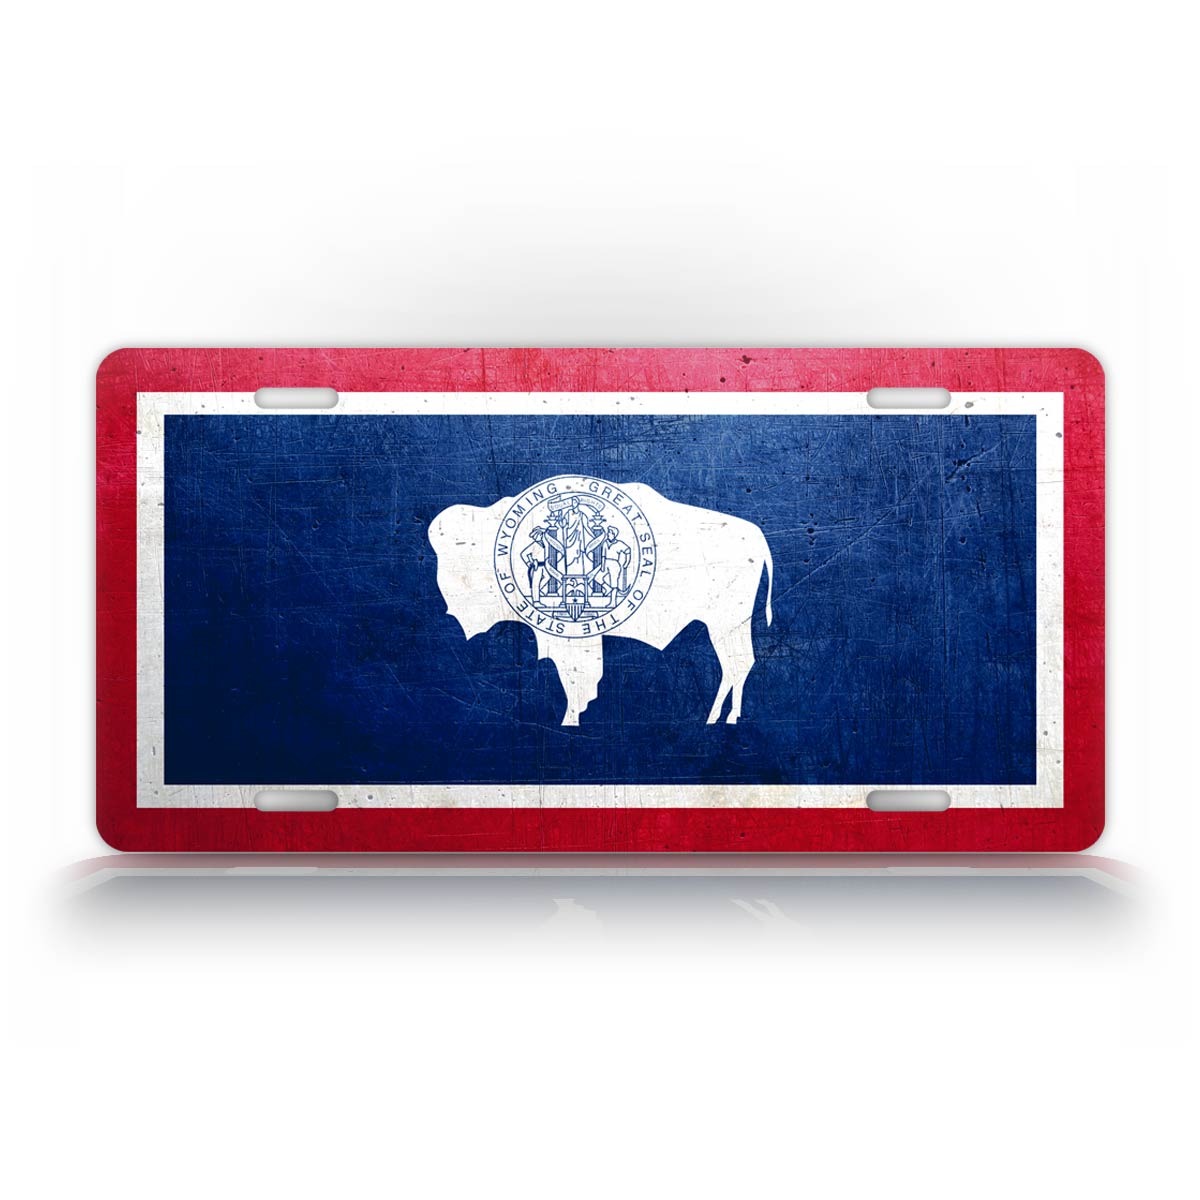 Wyoming State Flag Weathered Metal License Plate